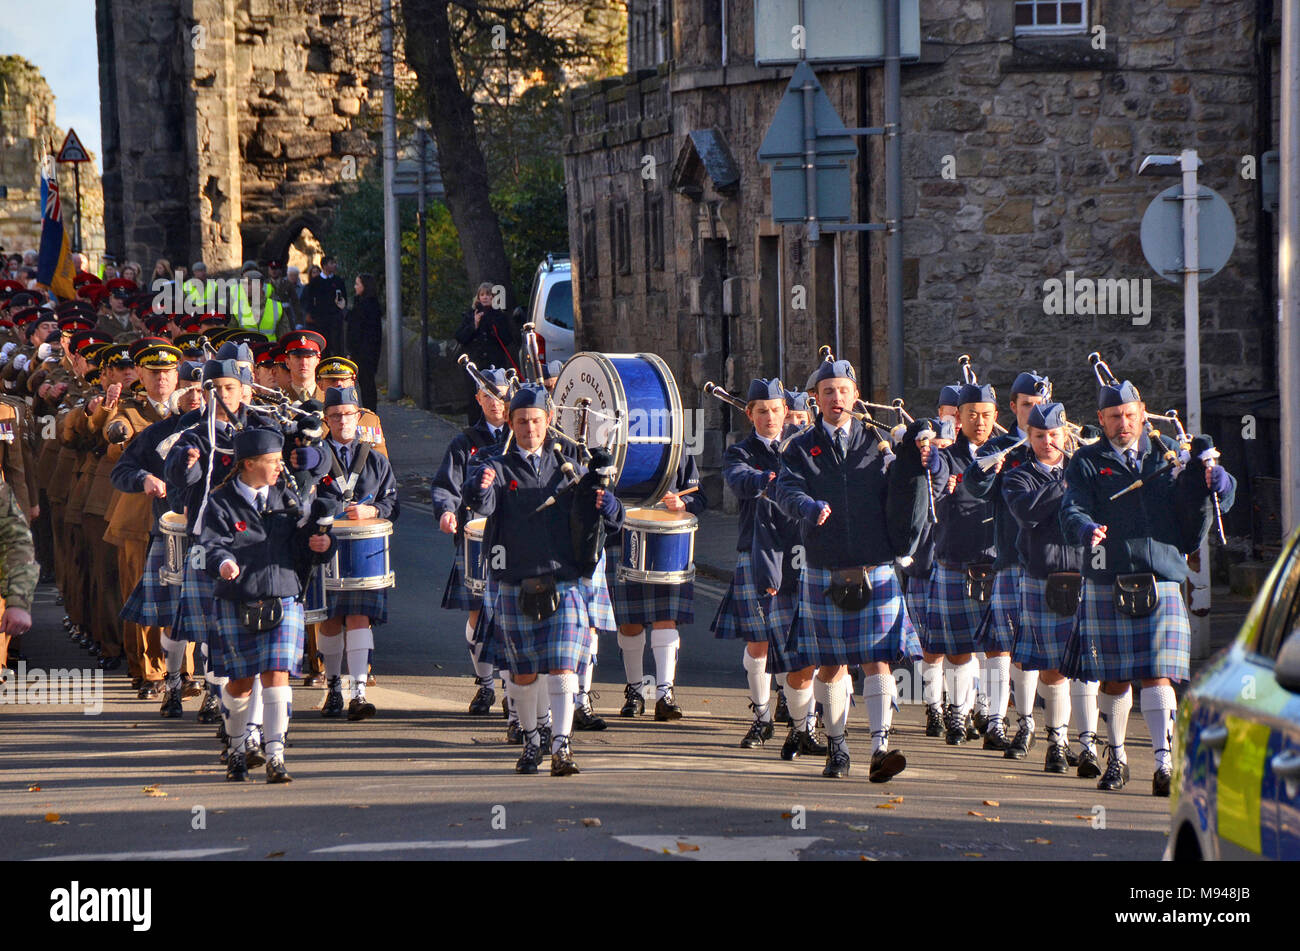 Representatives of the Madras School / college bagpipe band of St Andrews at a remembrance day parade in St Andrews Fife Stock Photo